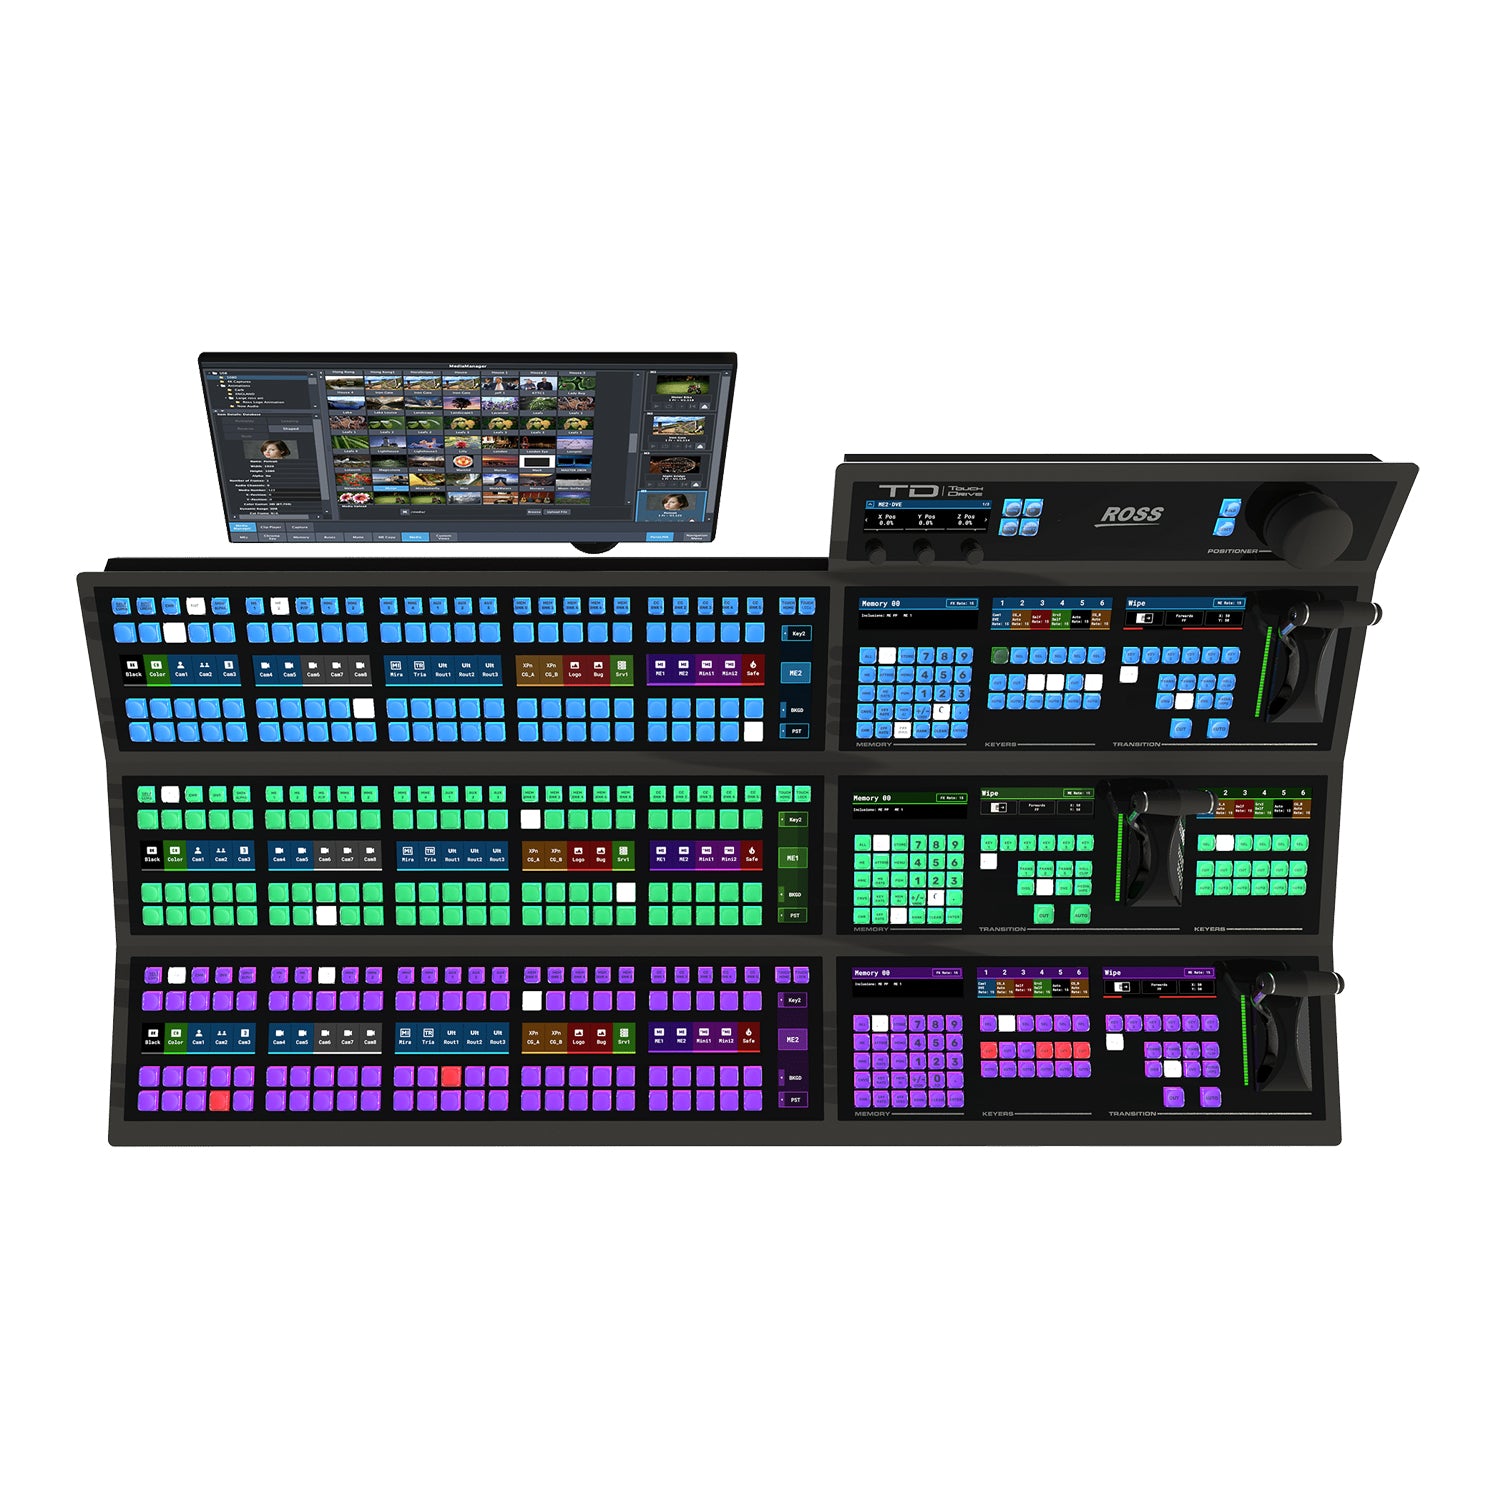 Ross TouchDrive TD3S 3ME Control Panel